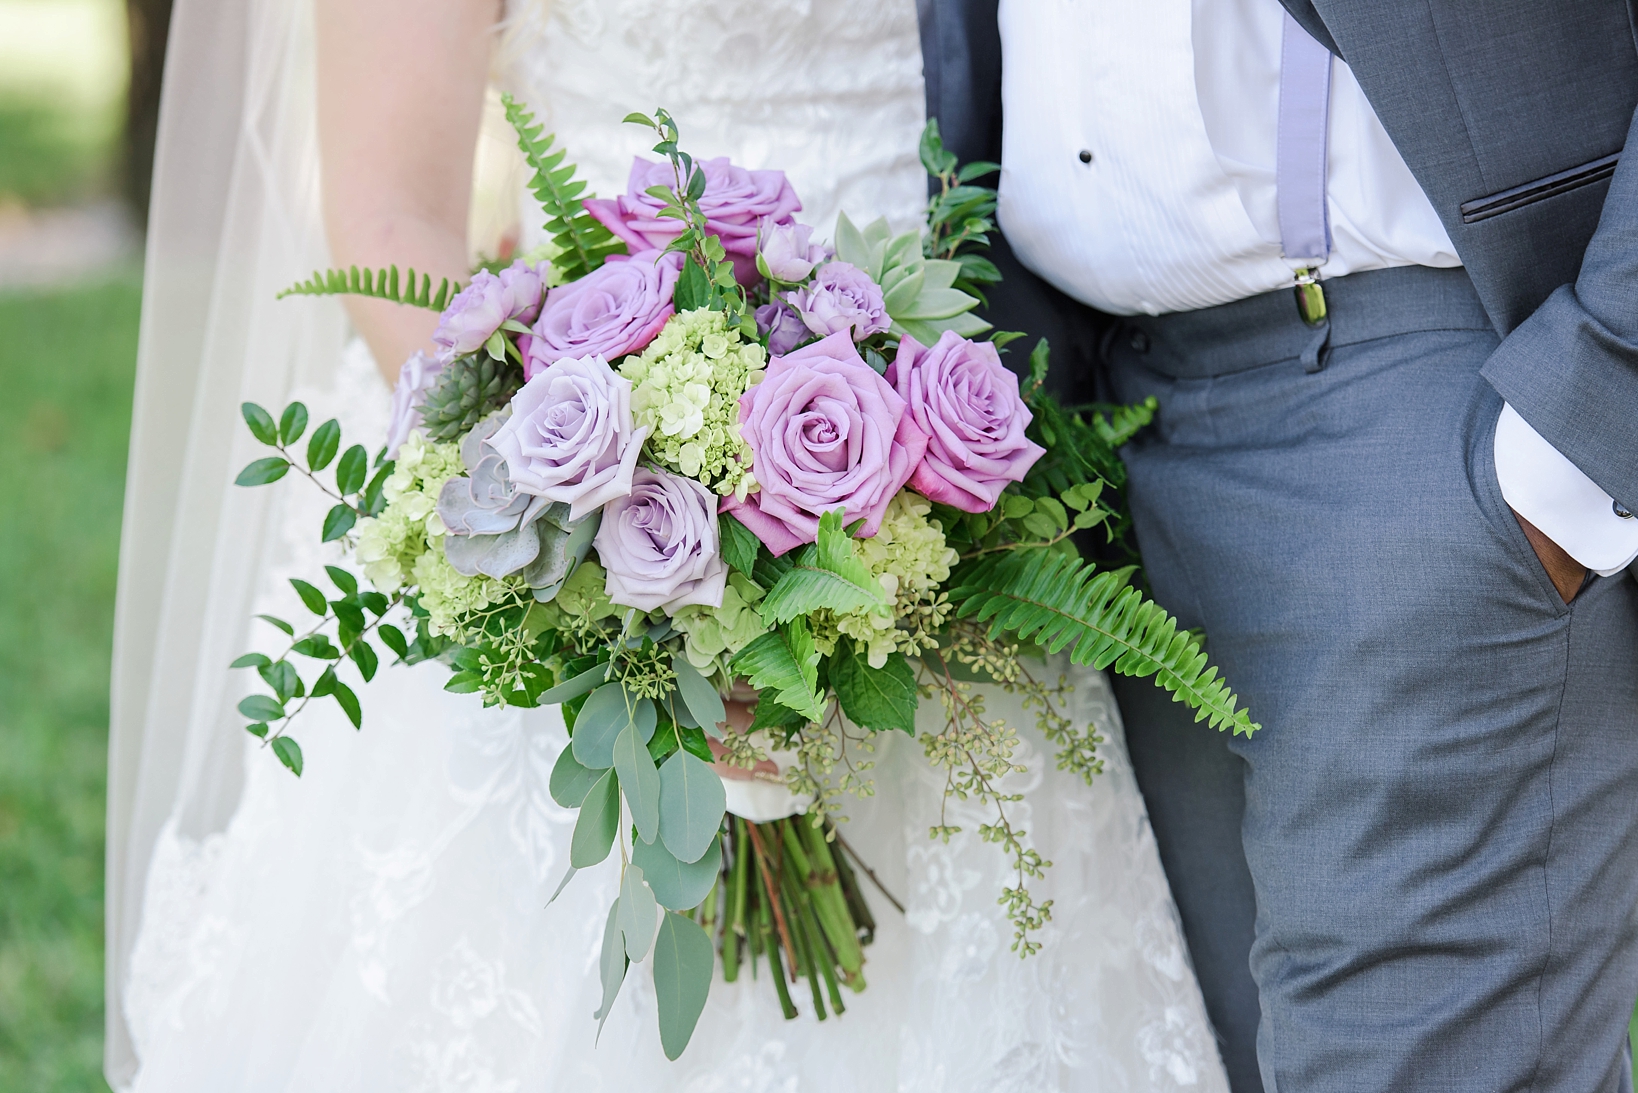 Bride holding her bouquet and grooms lavender suspenders